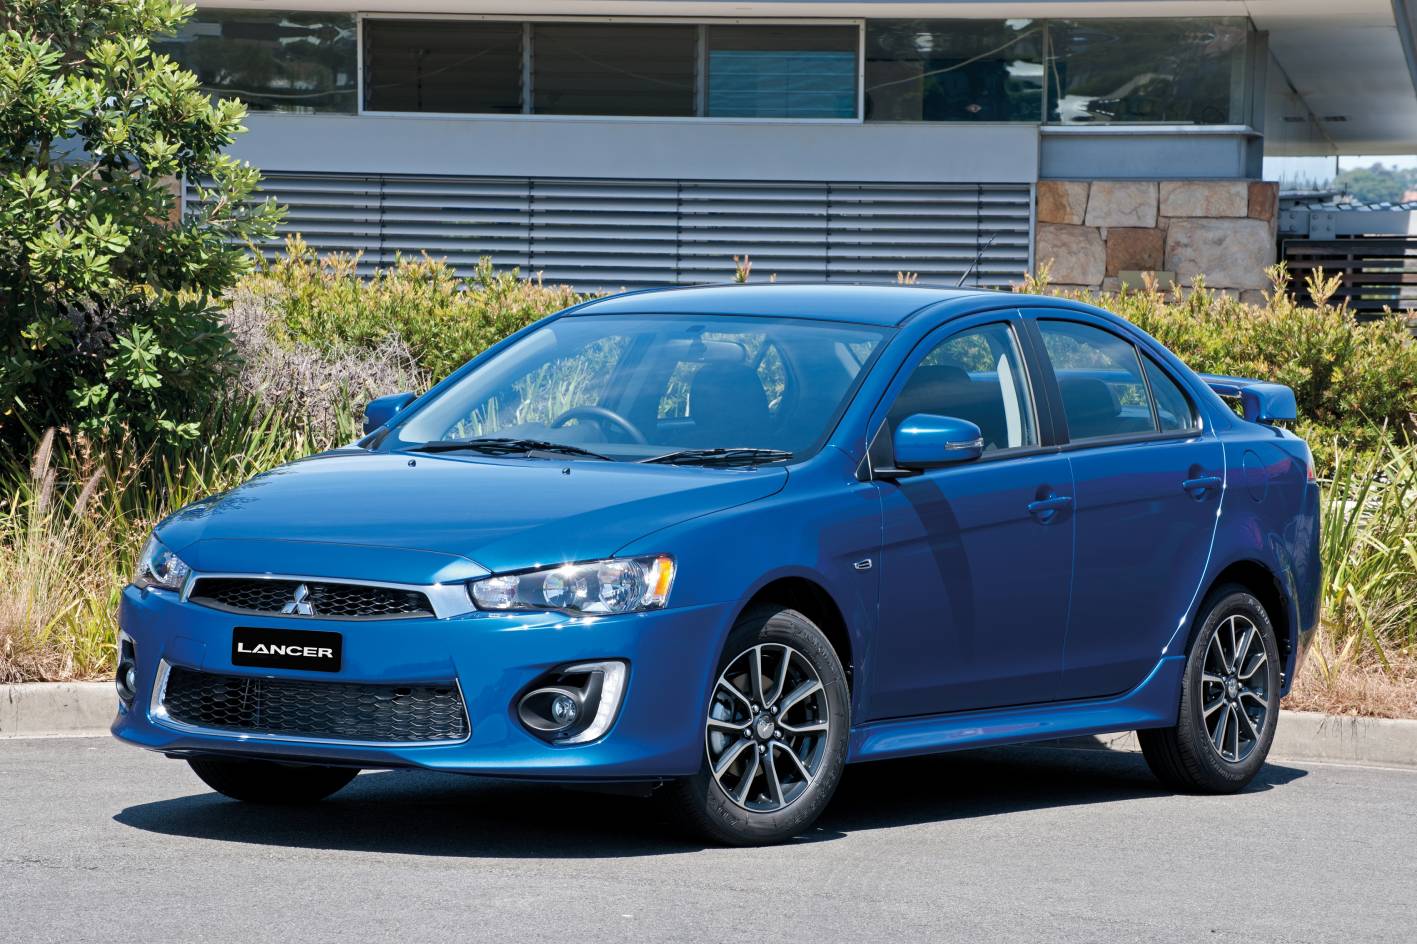 Mitsubishi Cars - News: Facelifted 2016 Lancer now available